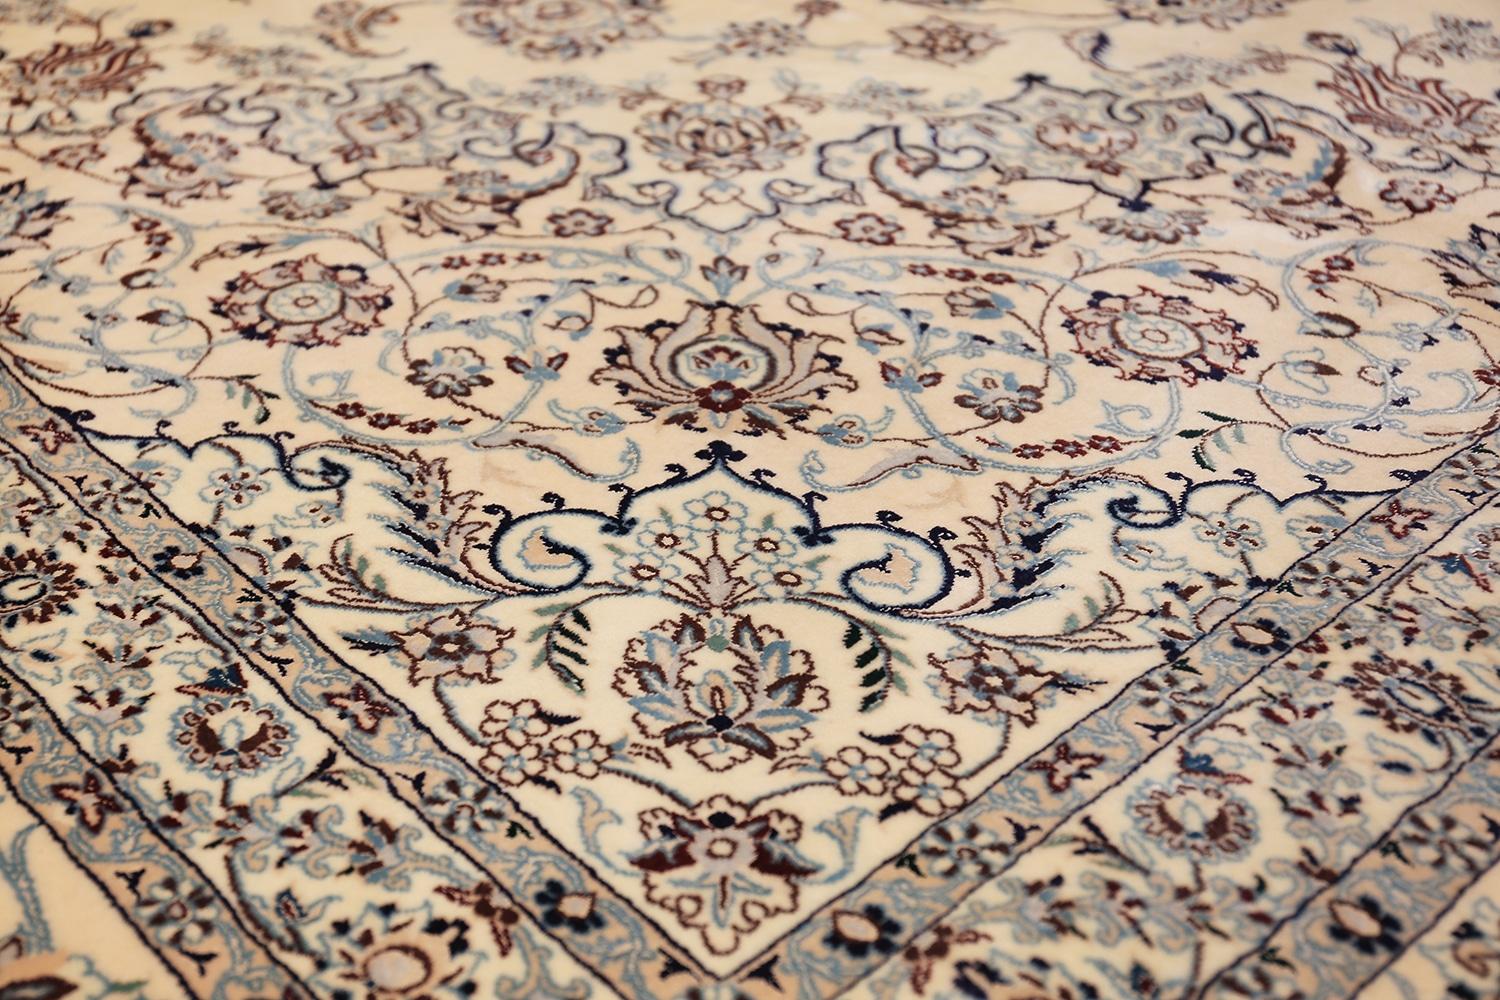 Hand-Knotted Floral Large Silk and Wool Vintage Nain Persian Rug. Size: 11 ft 6 in x 17 ft